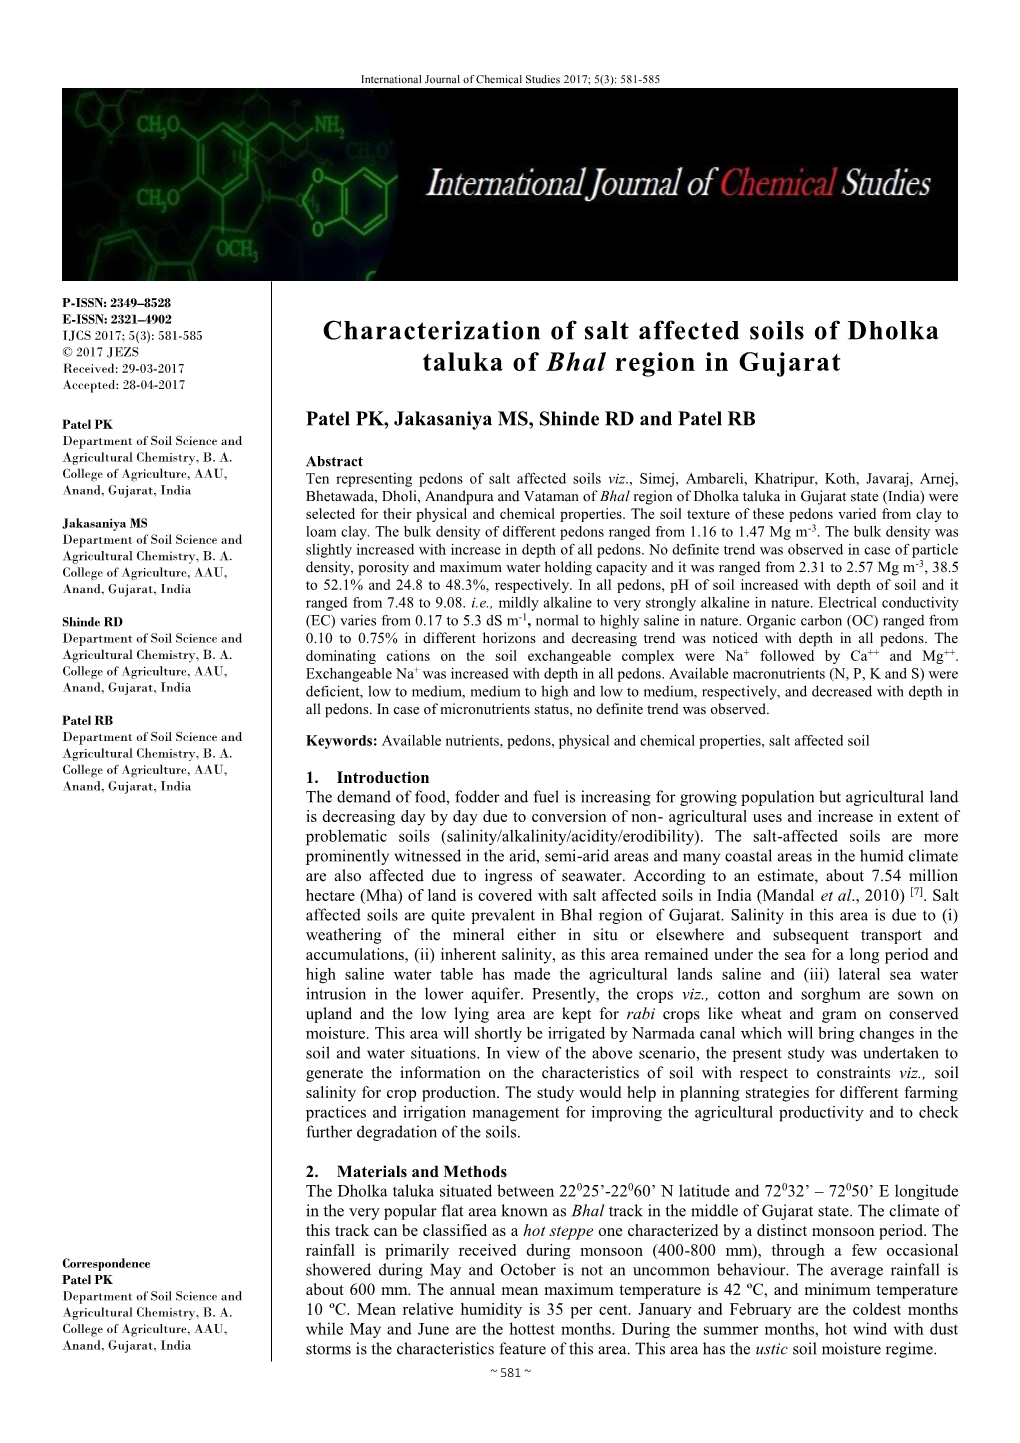 Characterization of Salt Affected Soils of Dholka Taluka of Bhal Region In